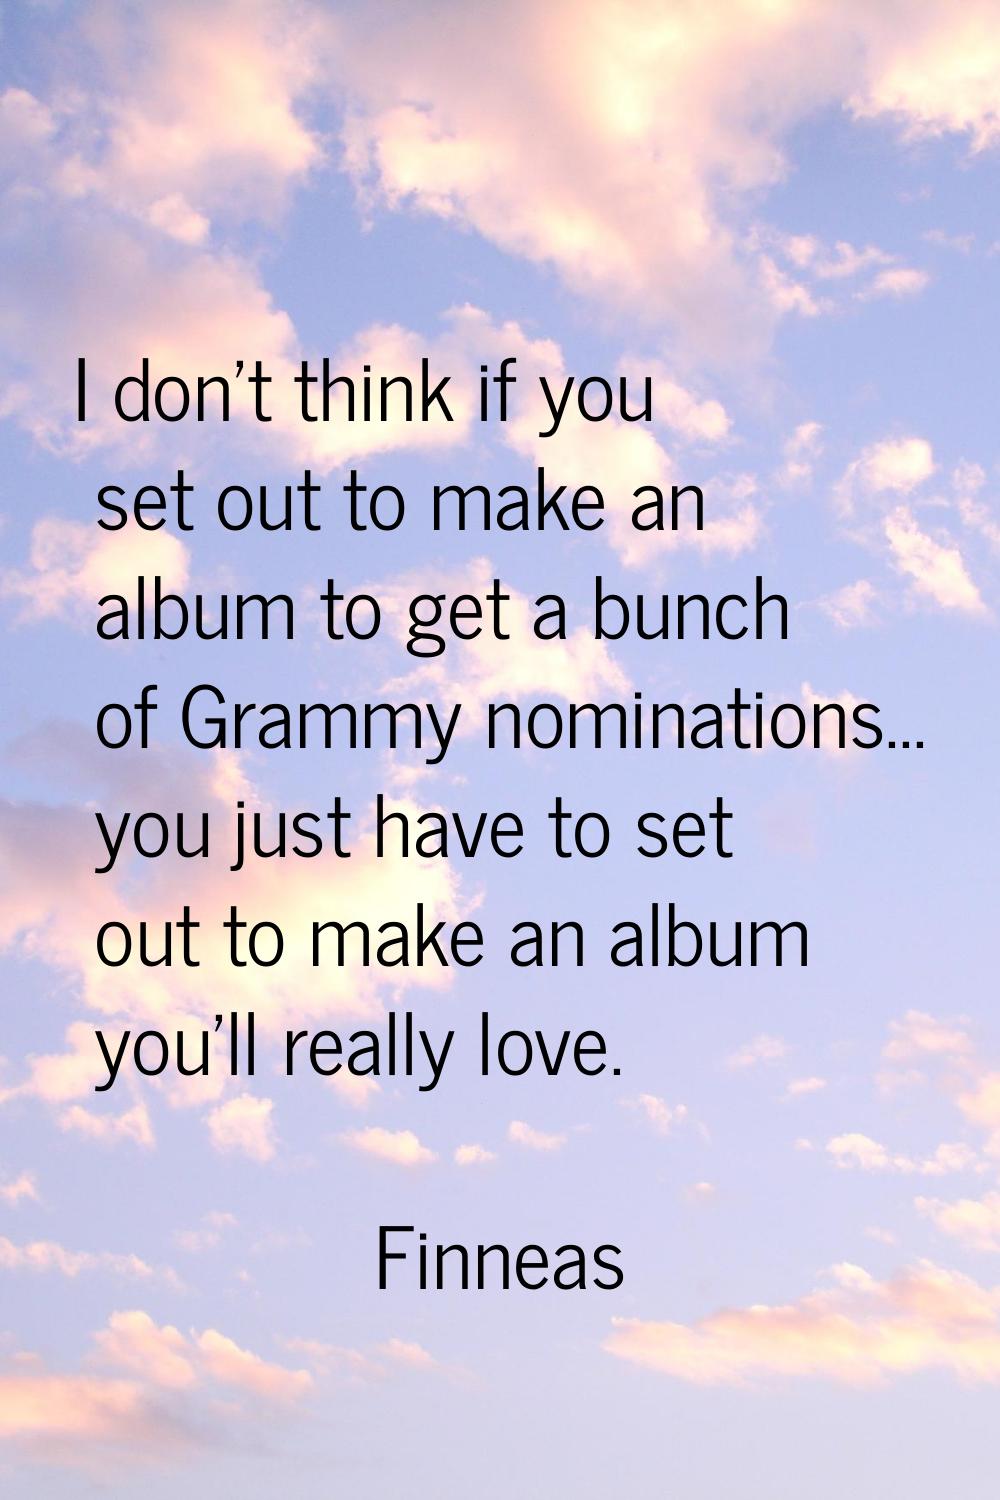 I don't think if you set out to make an album to get a bunch of Grammy nominations... you just have